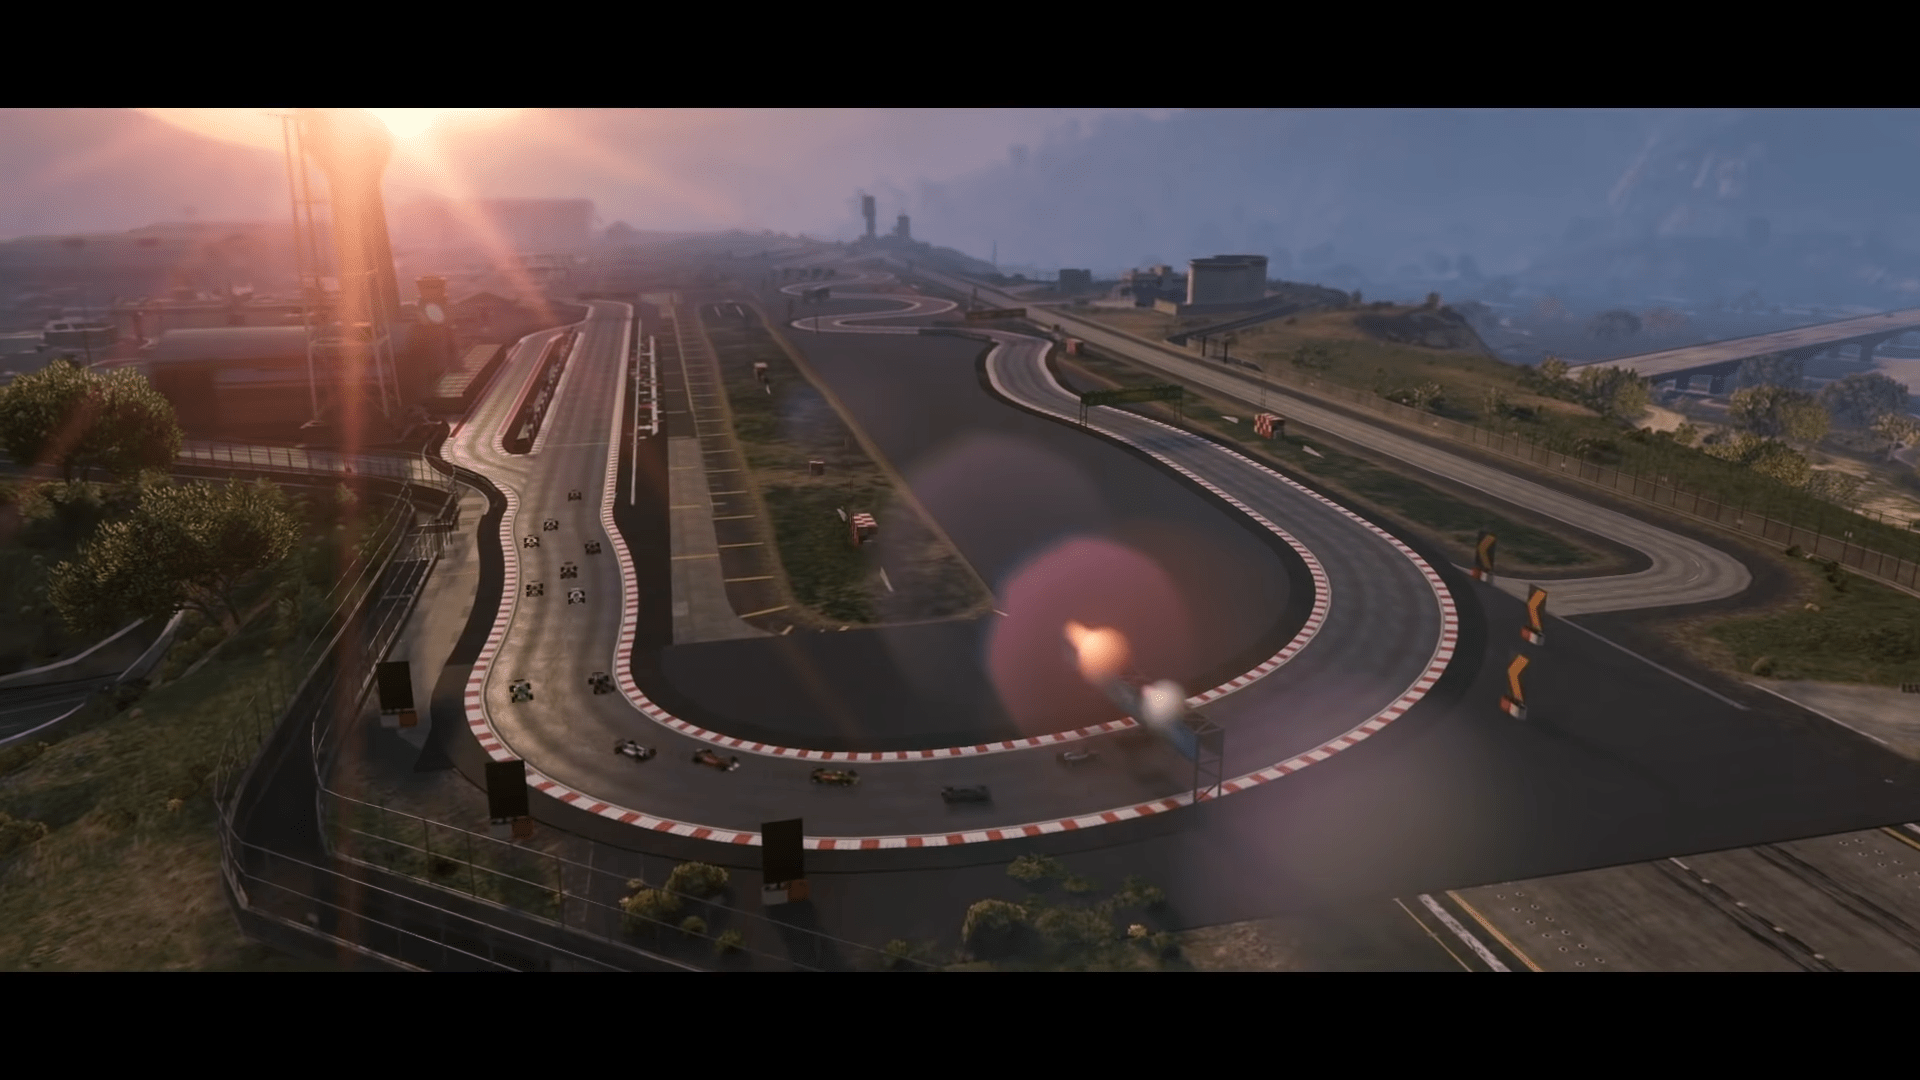 Open Wheel Racing Comes To Grand Theft Auto Online, Featuring The San Andreas Prix